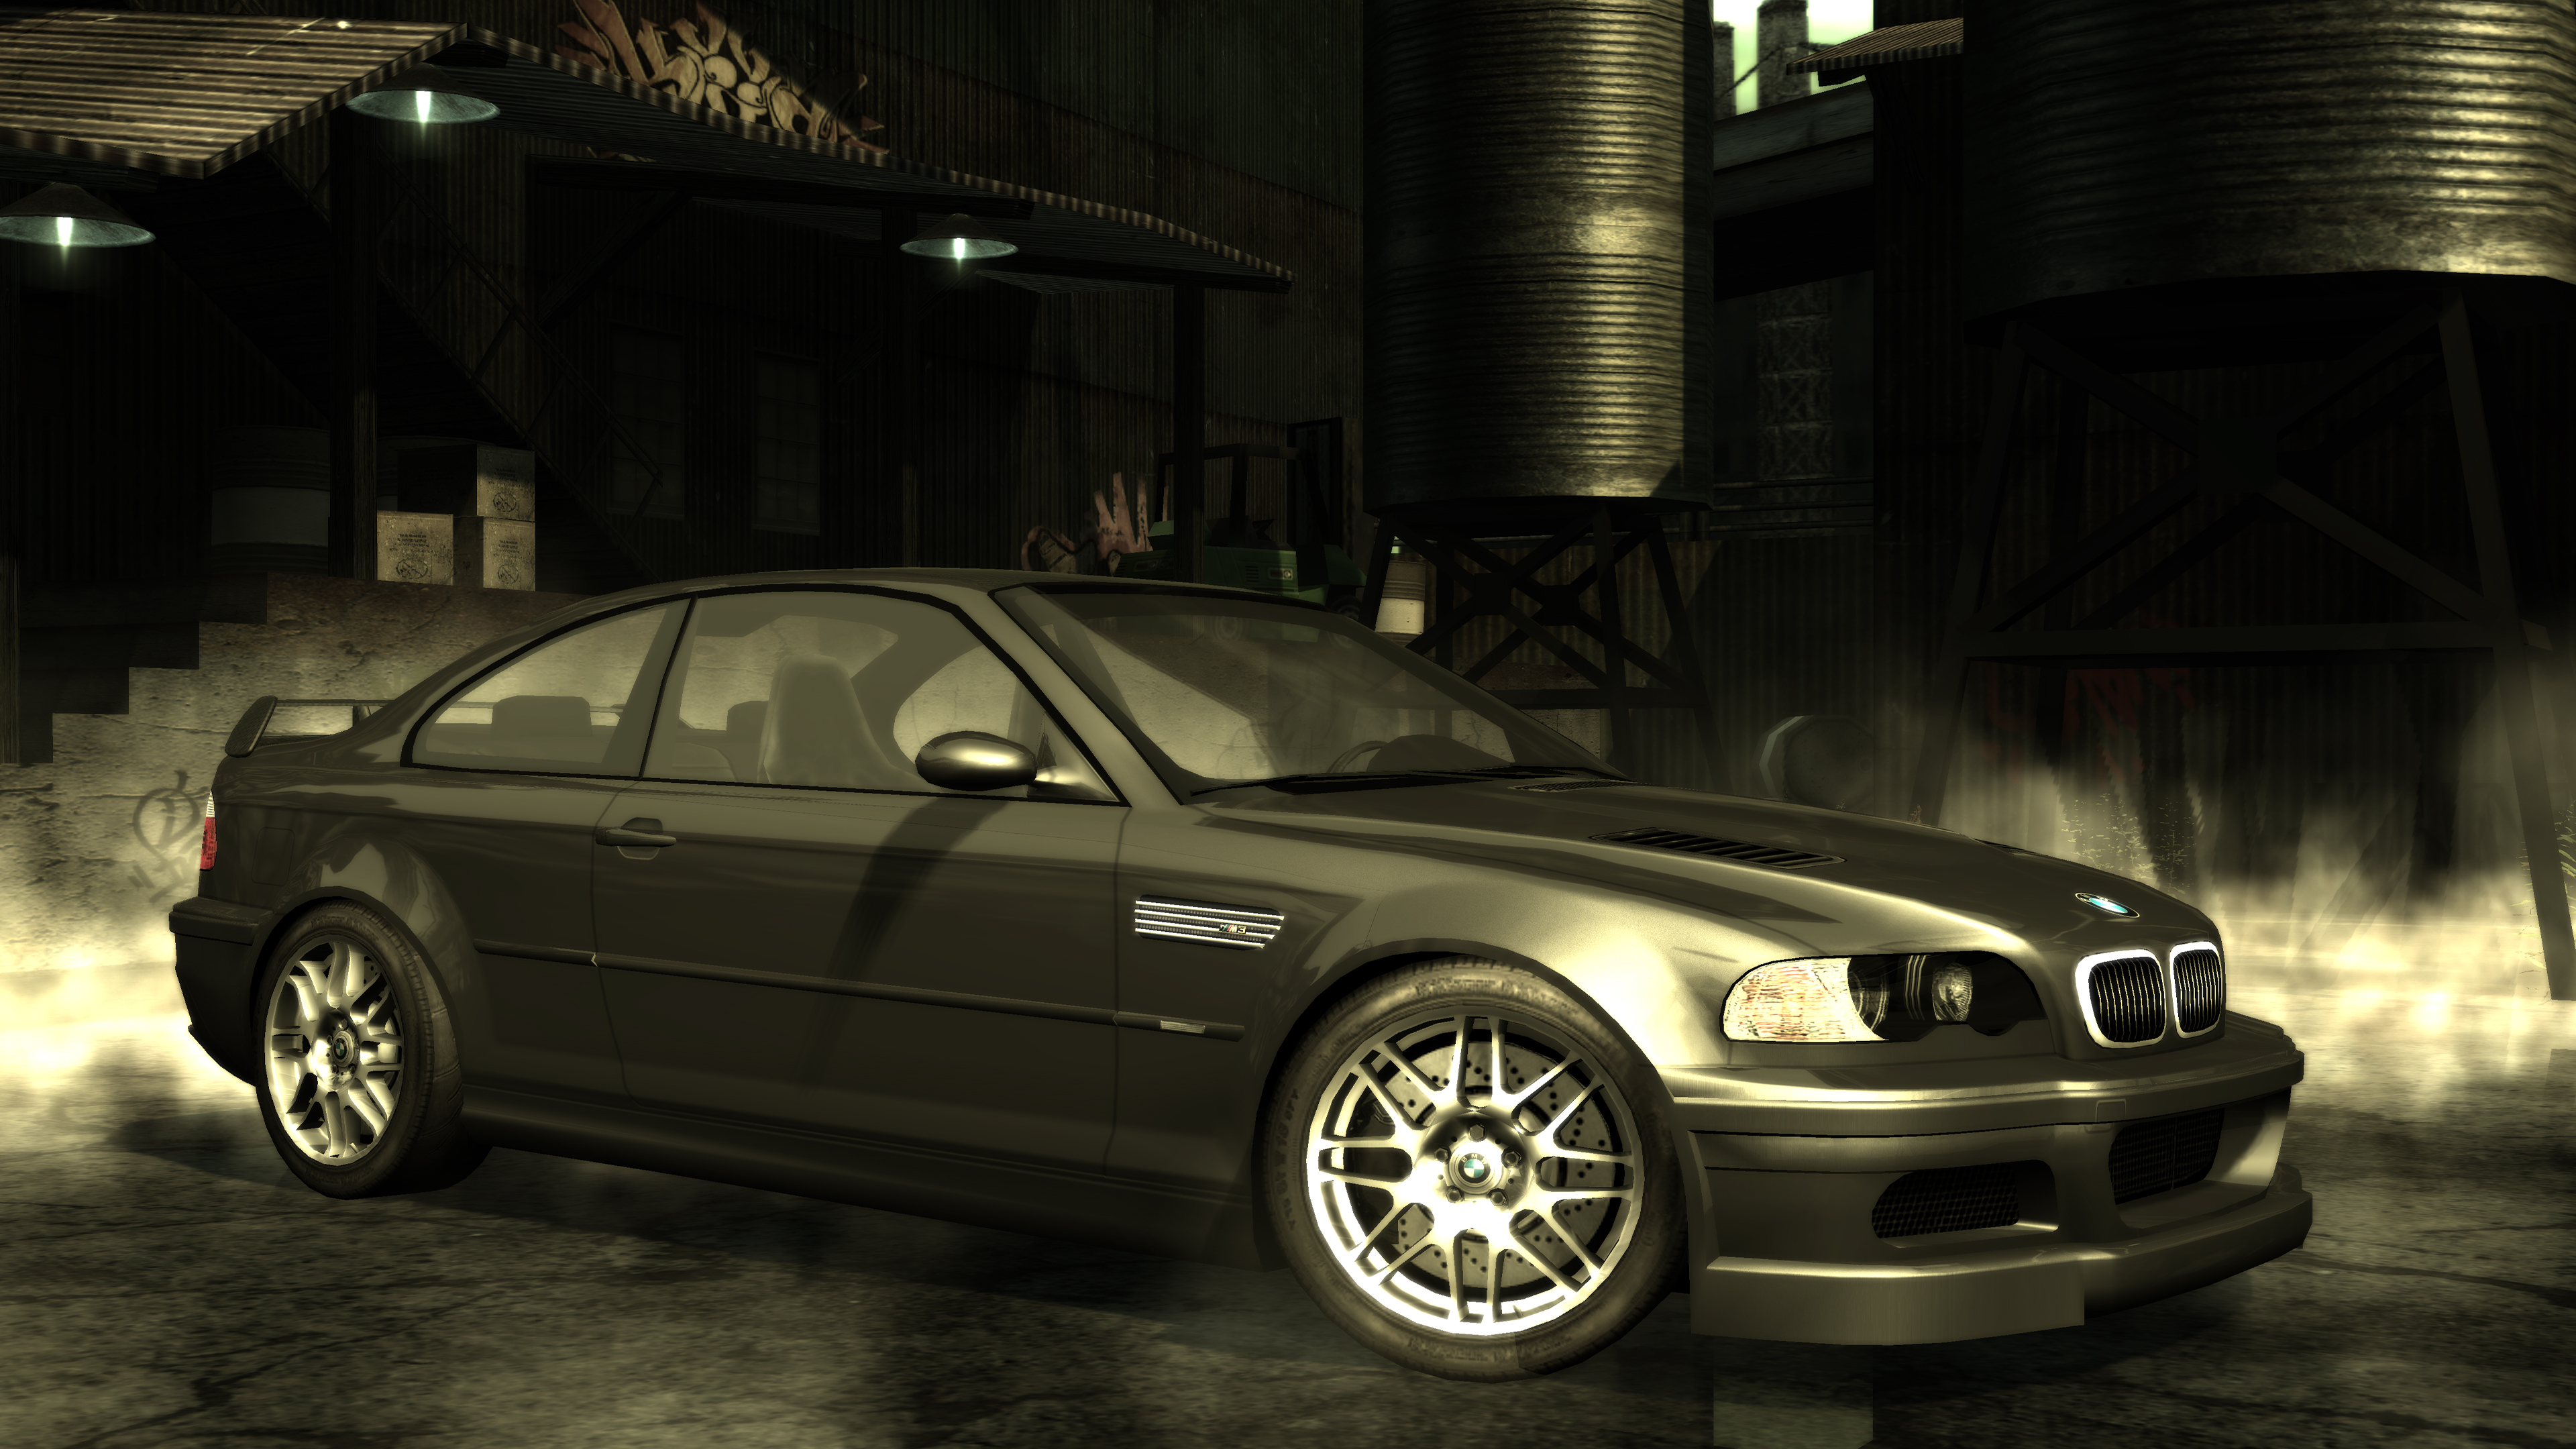 BMW M3 GTR (E46), Need for Speed Wiki